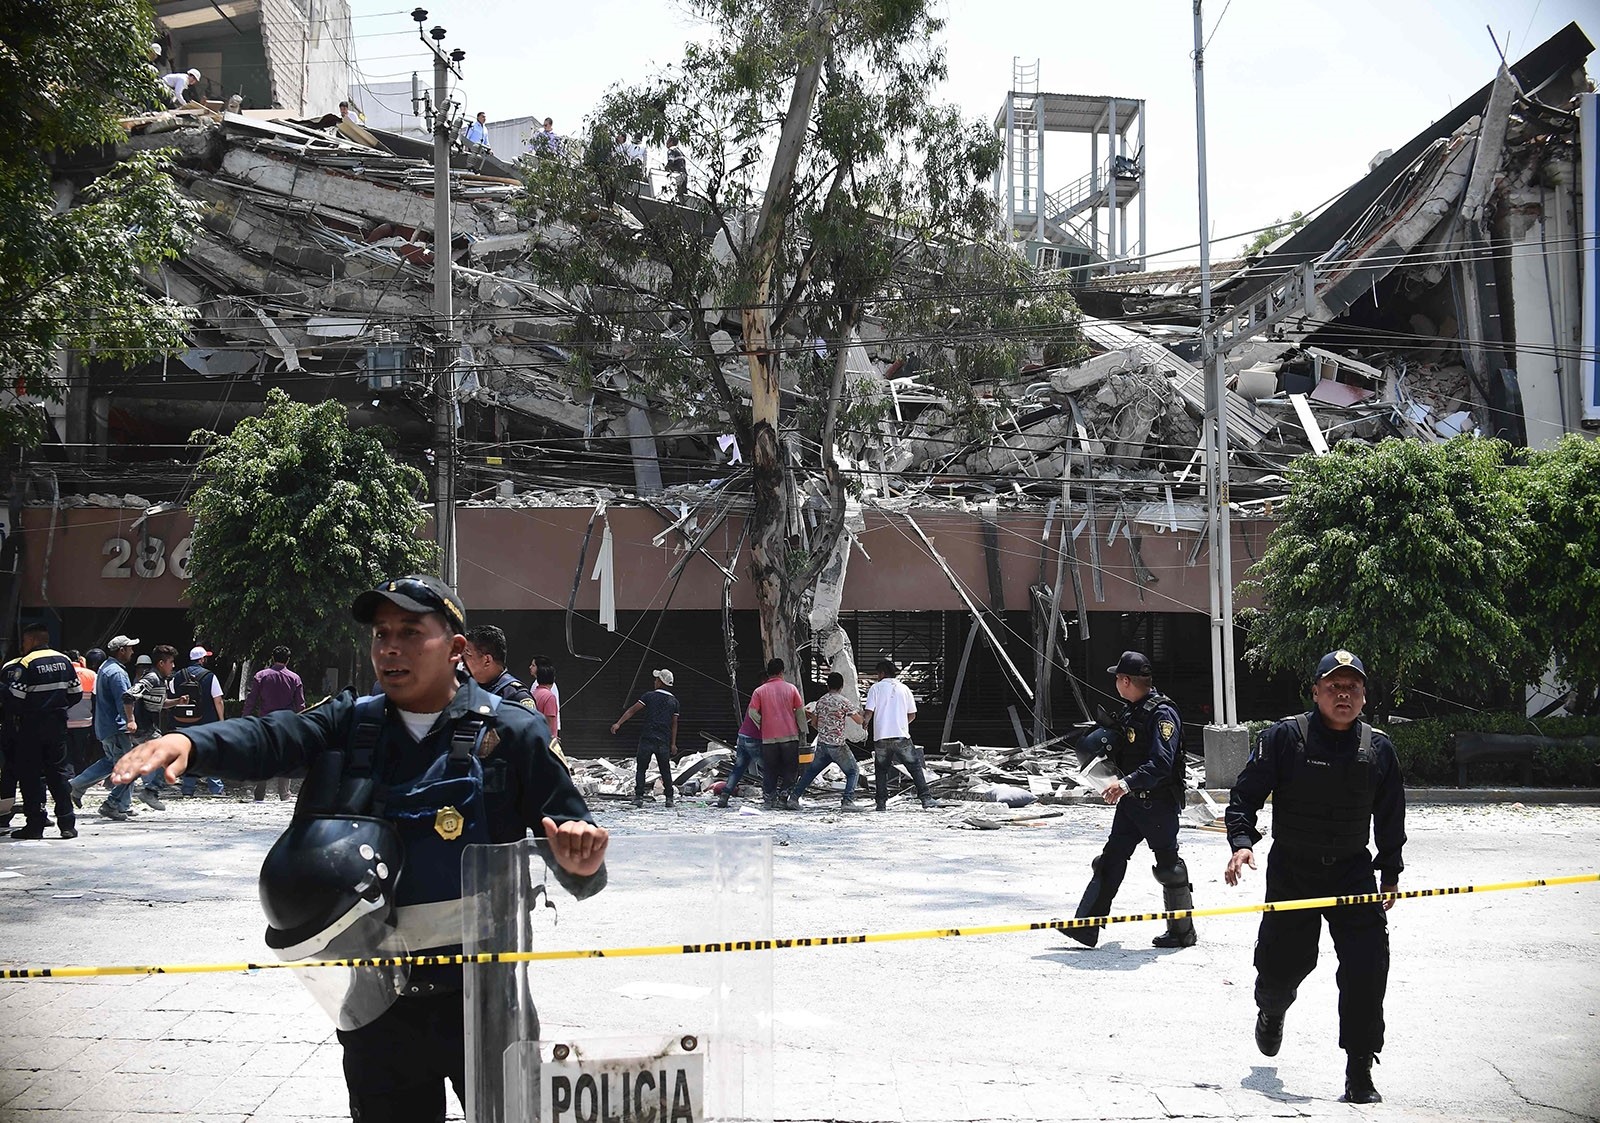 Police officers cordon the area off after a building collapsed during a quake in Mexico City on September 19, 2017. (AFP Photo)